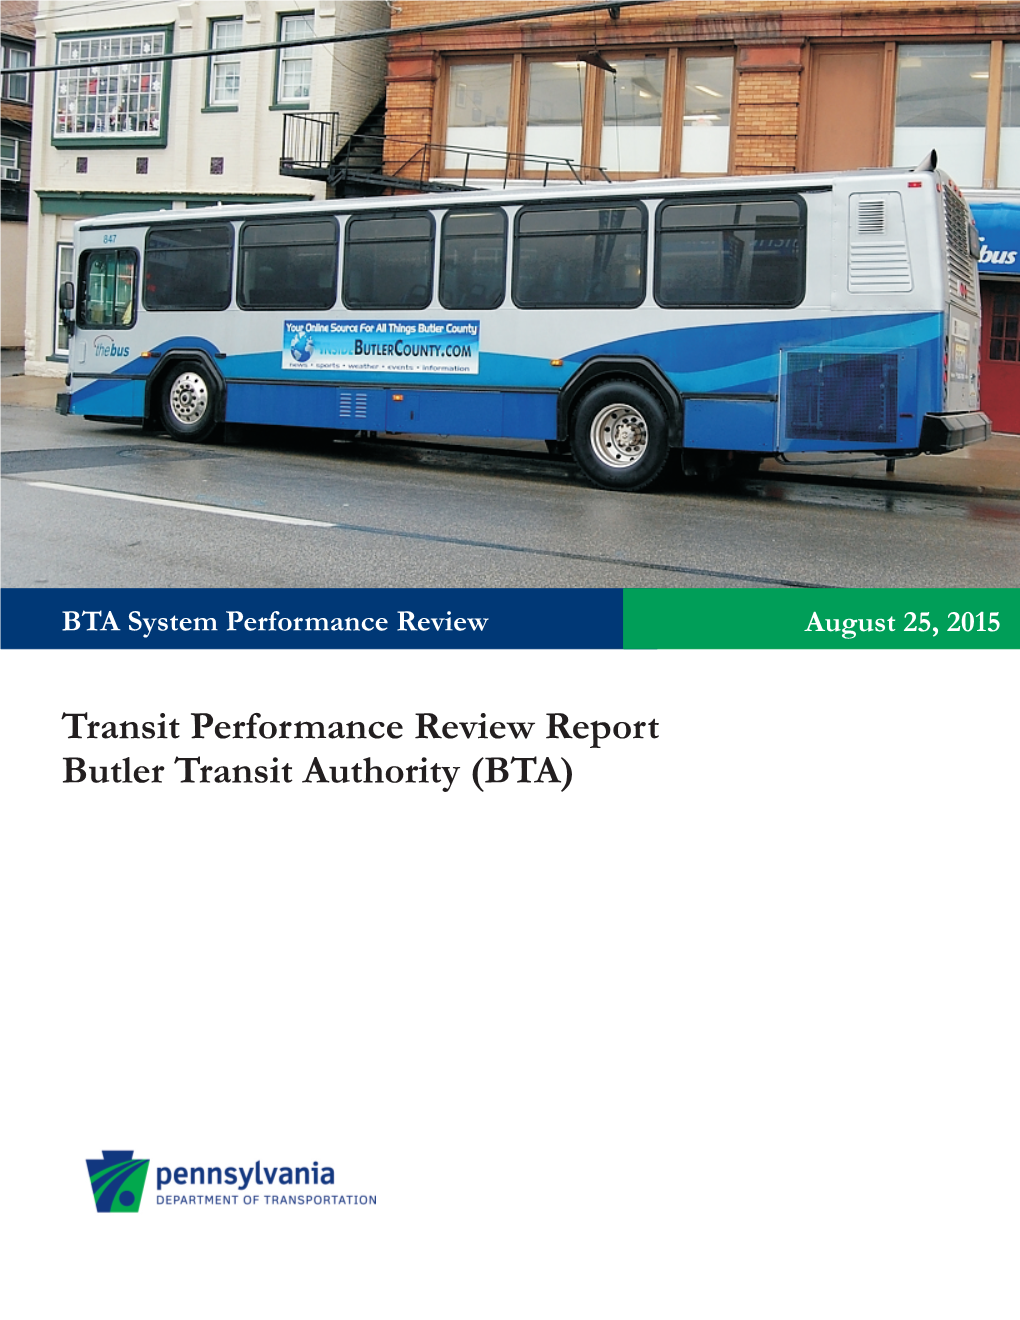 Transit Performance Review Report Butler Transit Authority (BTA) This Page Is Intentionally Blank to Allow for Duplex Printing